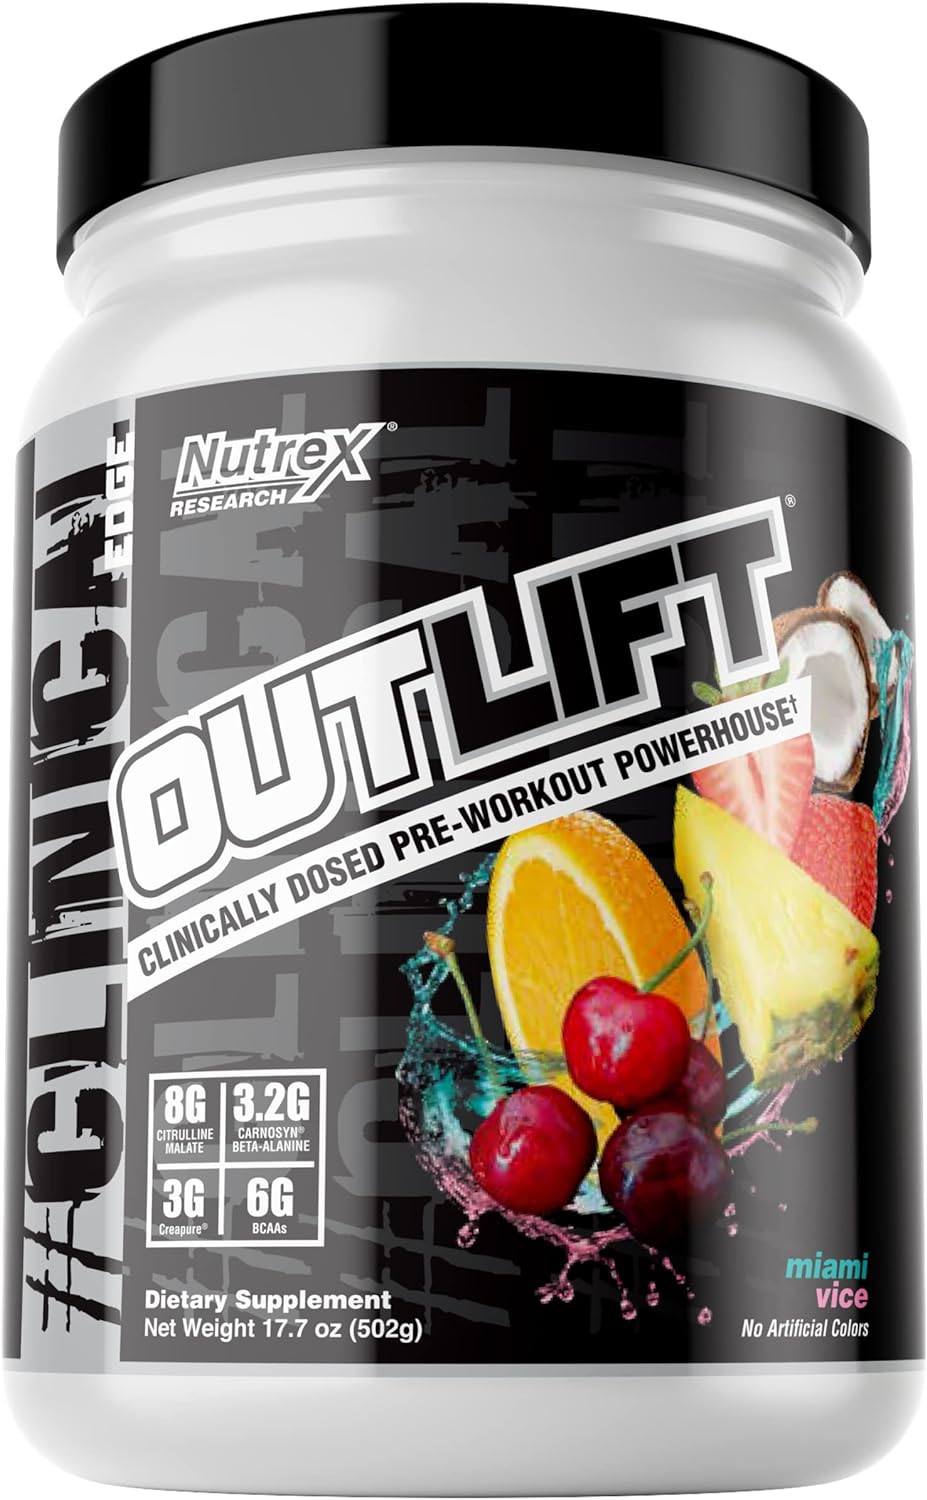 Nutrex Research Outlift Clinically Dosed Pre Workout Powder | Energy,